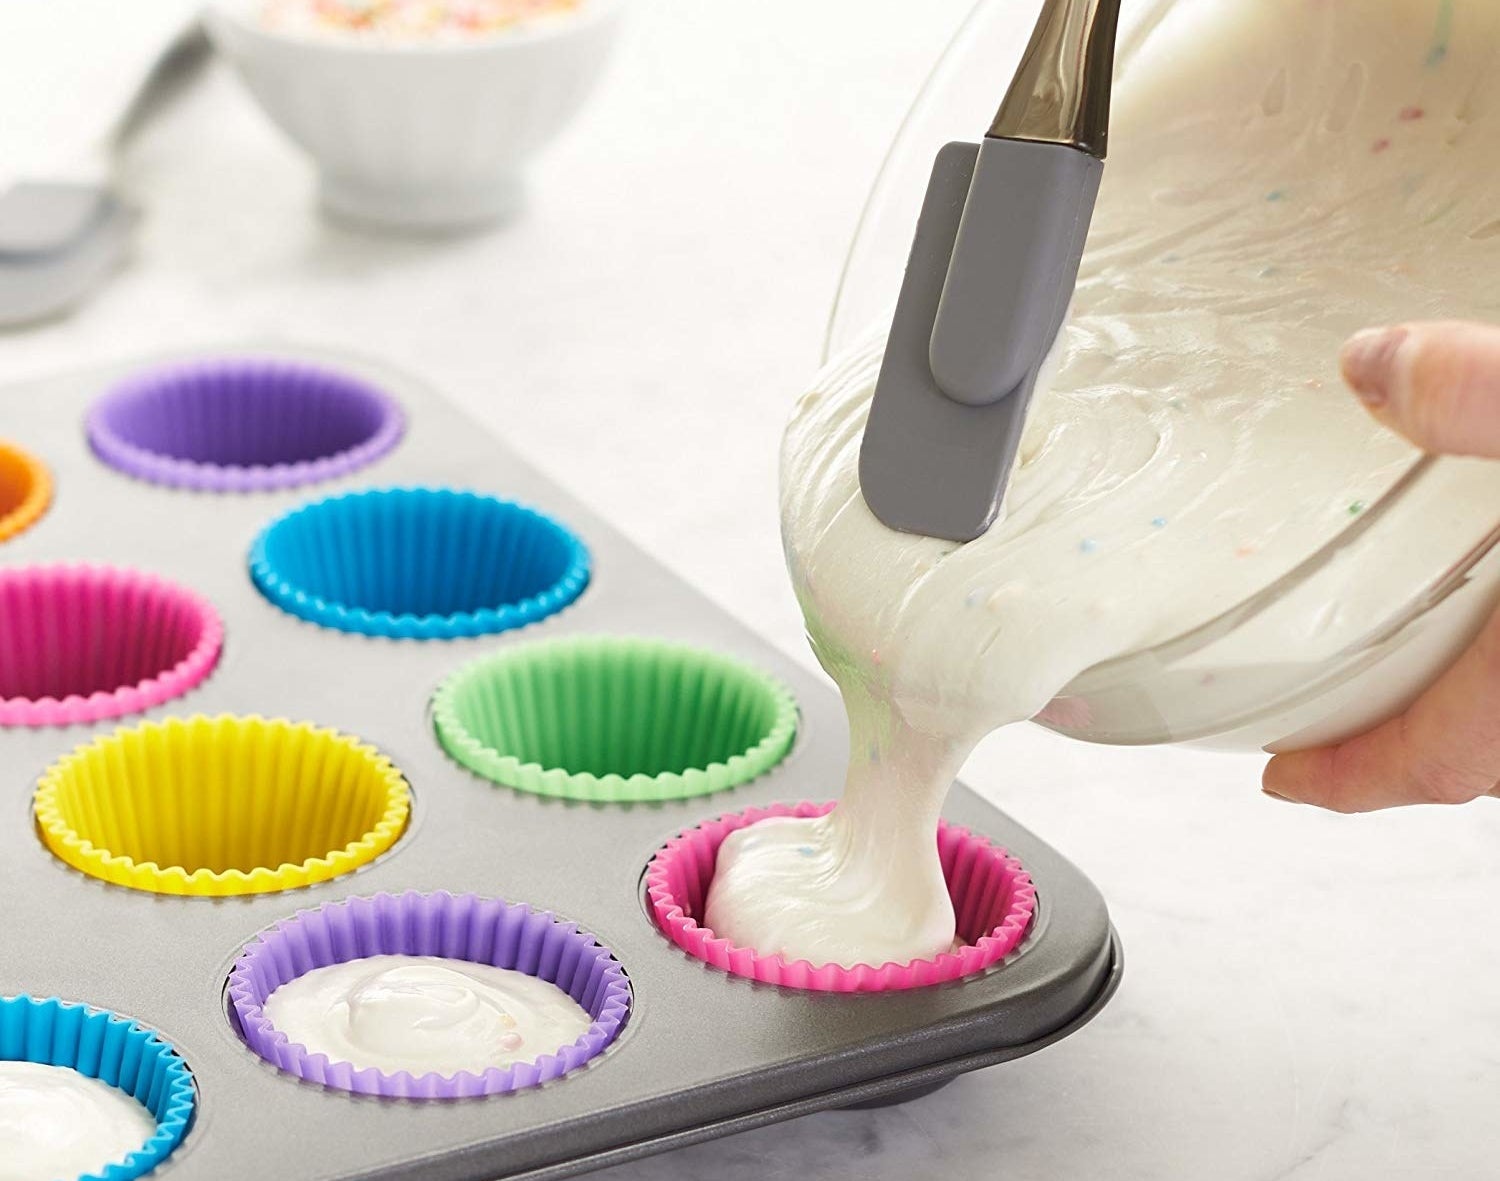 A person pouring batter into the reusable silicone baking cups